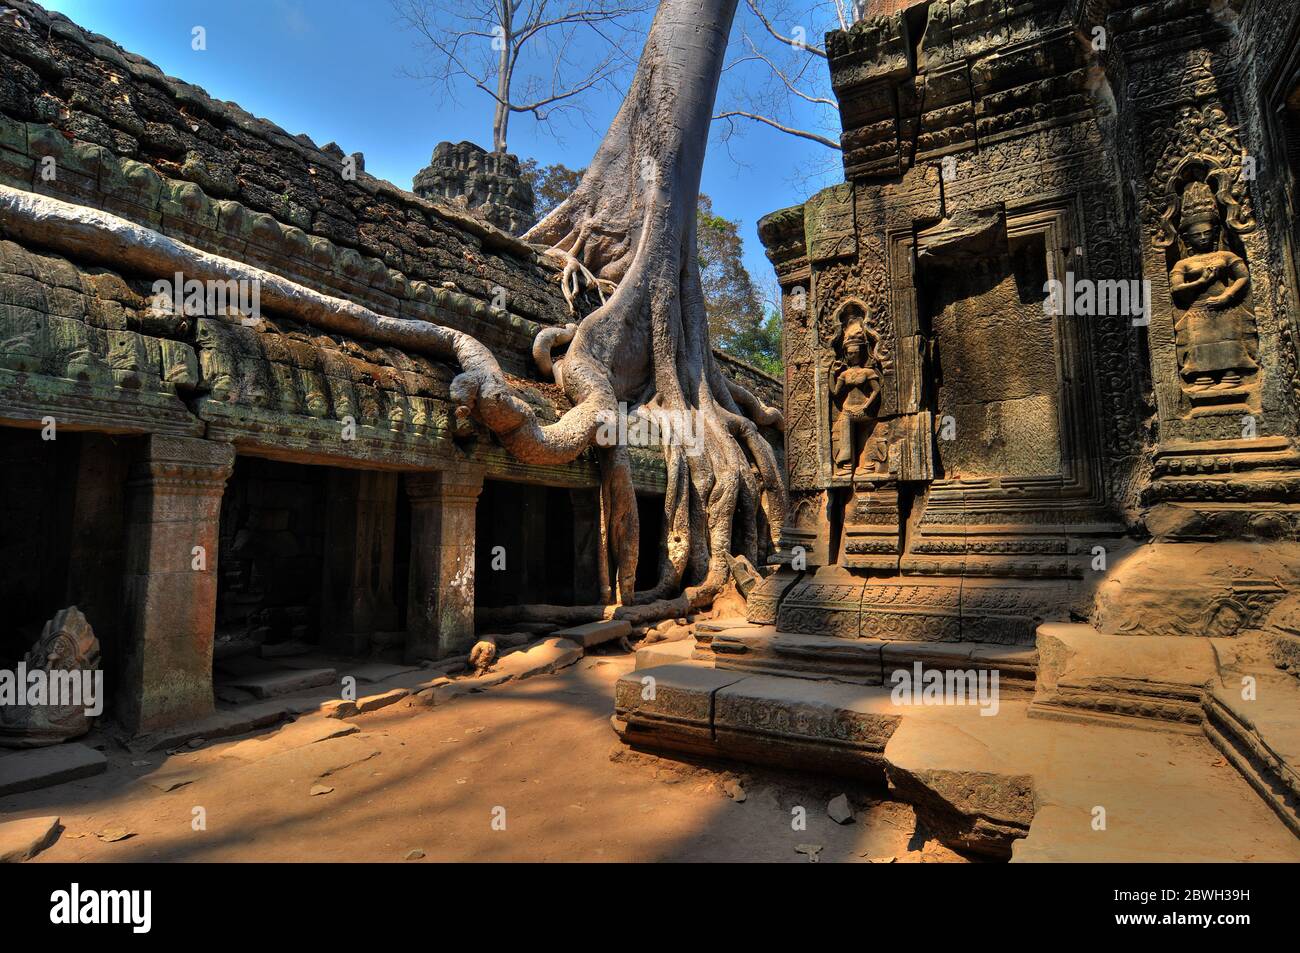 The khmer archaeological site of Ta Prohm, Angkor, Siem Reap, Cambodia. Stock Photo